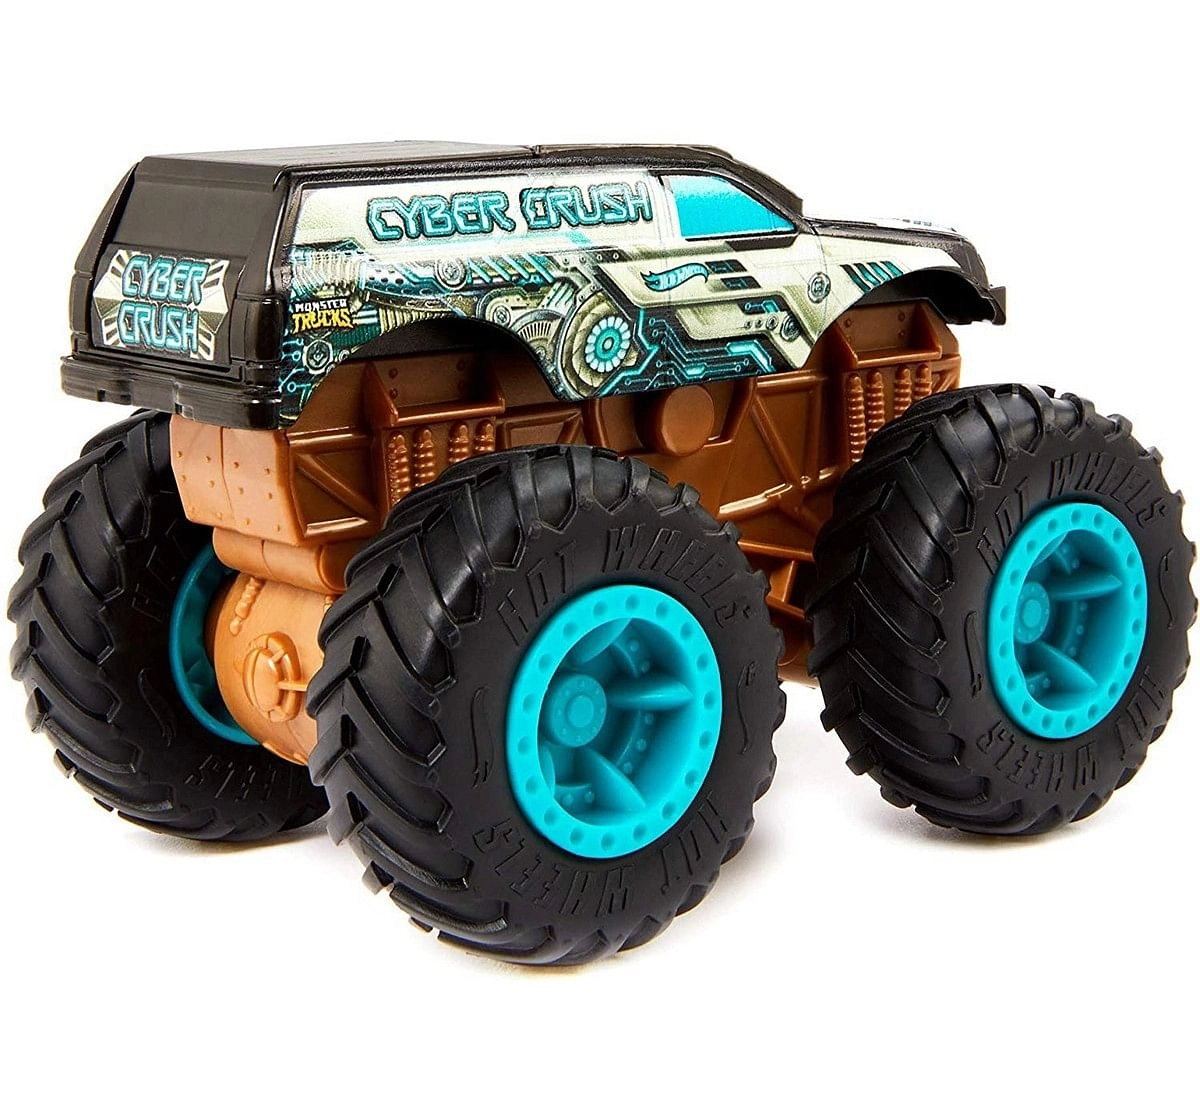 Hot Wheels Monster Trucks 1:43 Bash Ups Vehicles for Kids age 3Y+, Assorted